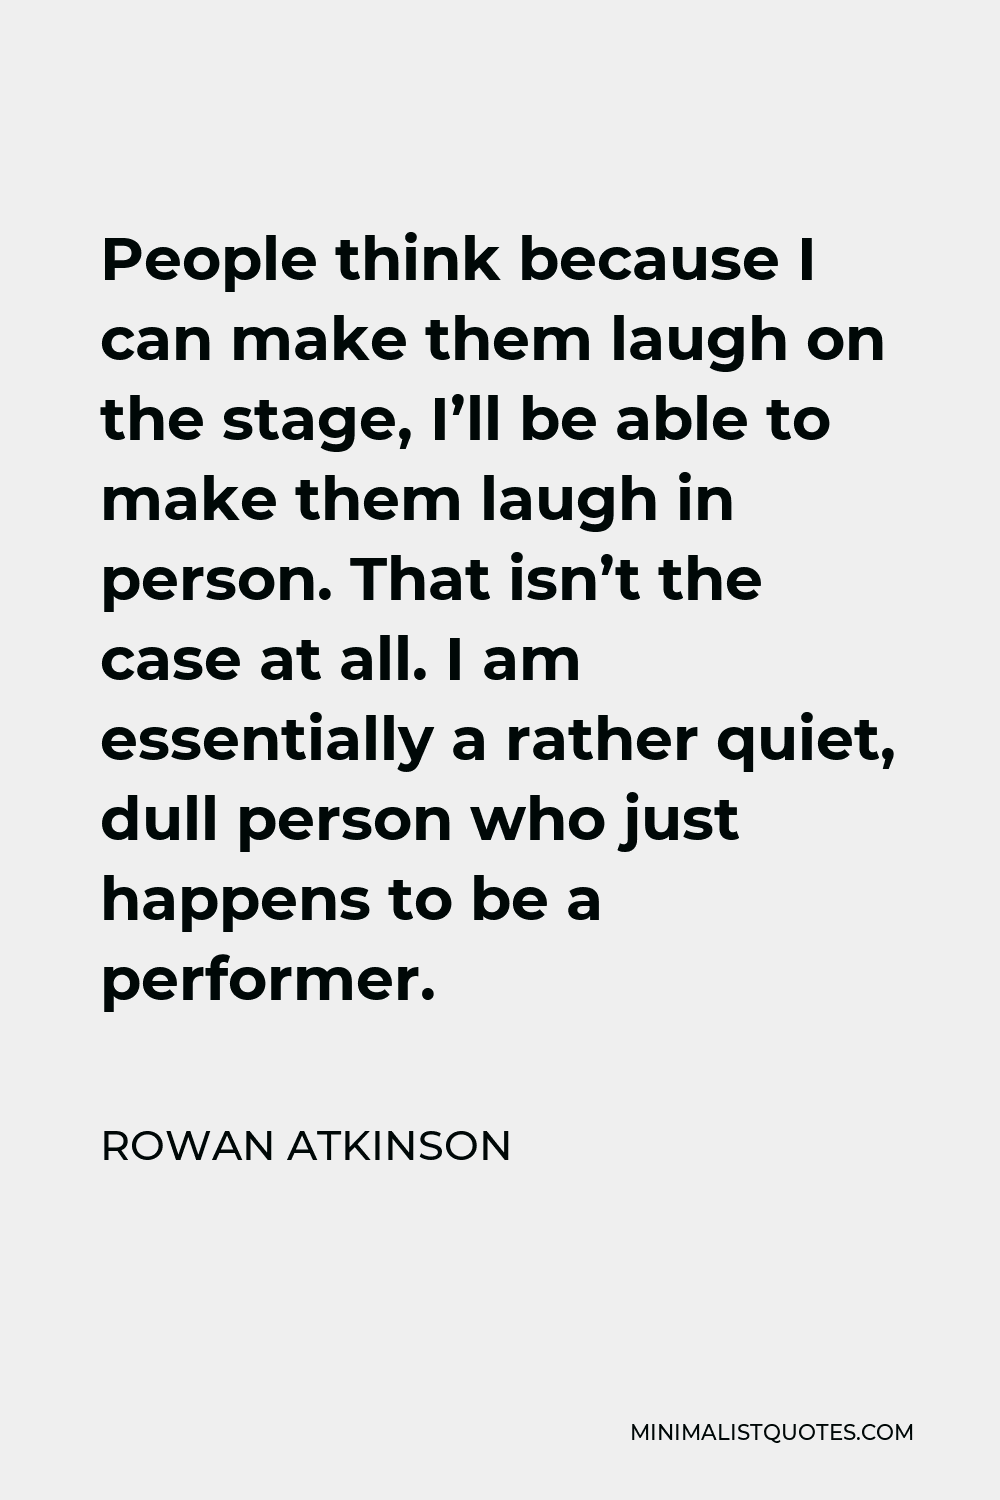 Rowan Atkinson Quote - People think because I can make them laugh on the stage, I’ll be able to make them laugh in person. That isn’t the case at all. I am essentially a rather quiet, dull person who just happens to be a performer.